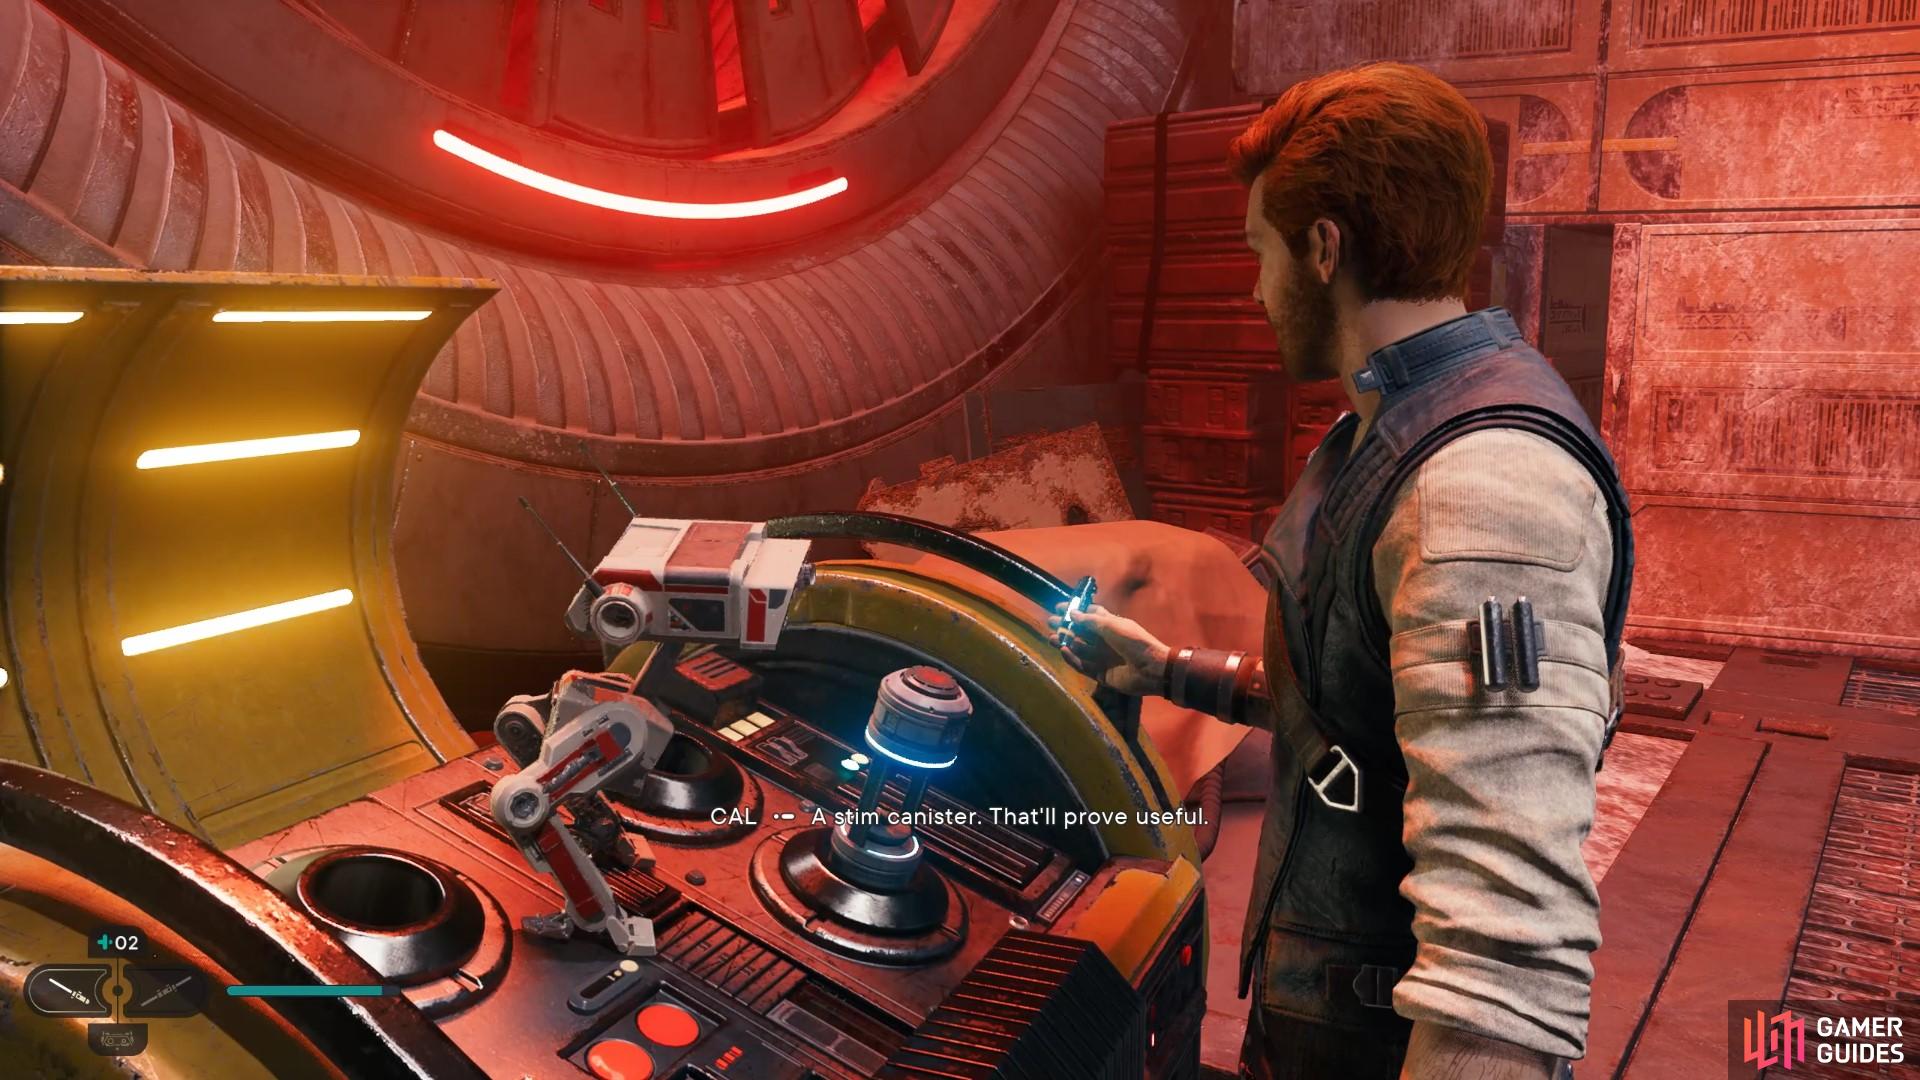 Defeating the Security Droid allows access to this chest, which grants you the Coruscant Stim Location in Jedi Survivor.